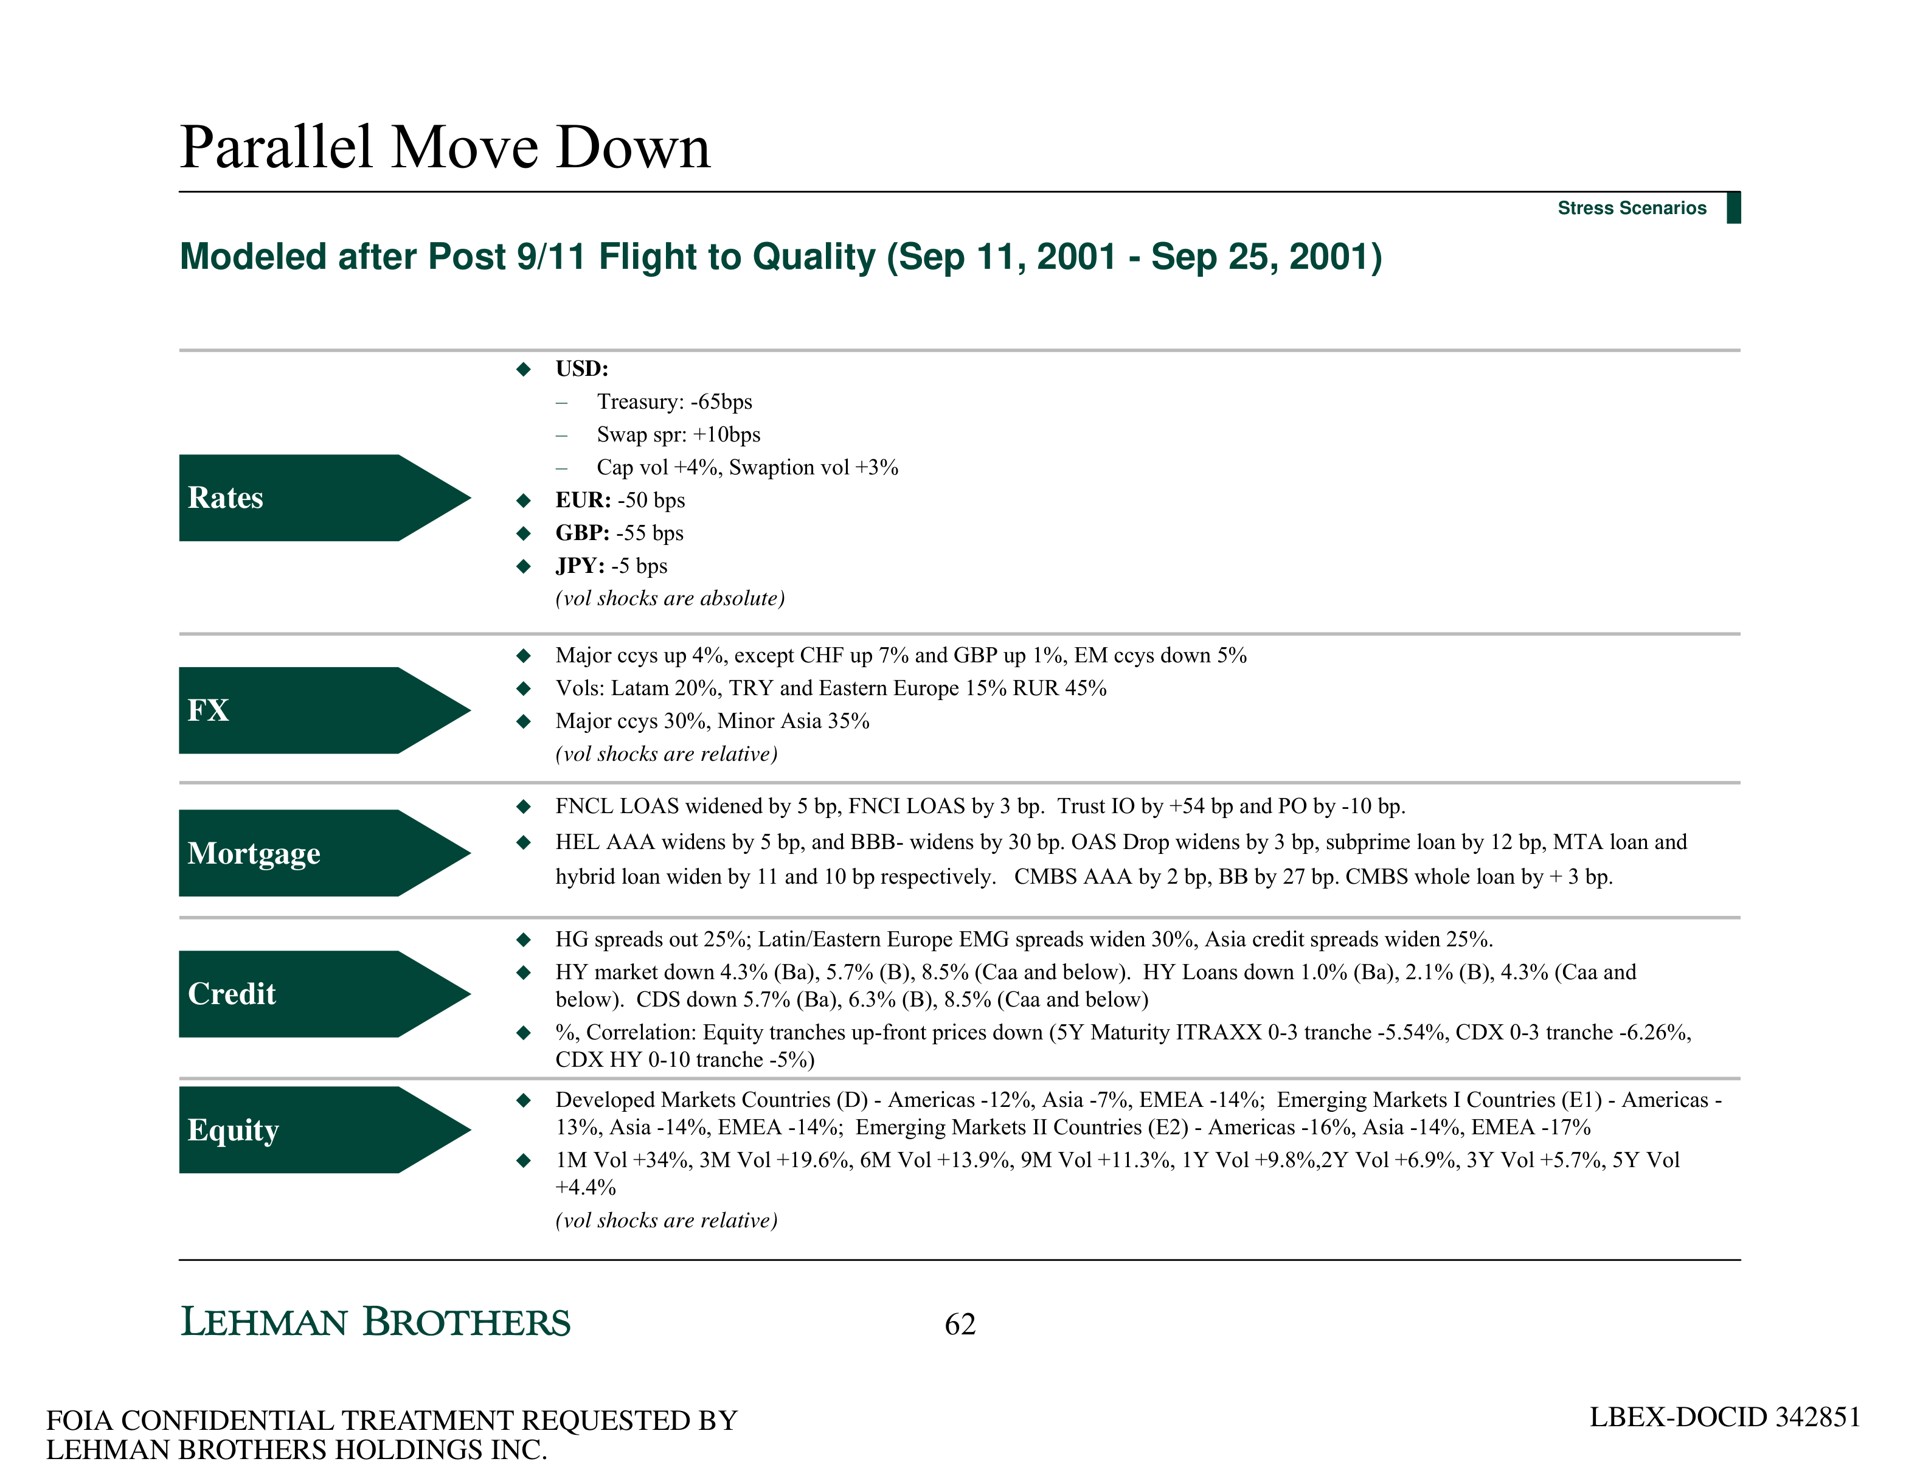 parallel move down modeled after post flight to quality | Lehman Brothers